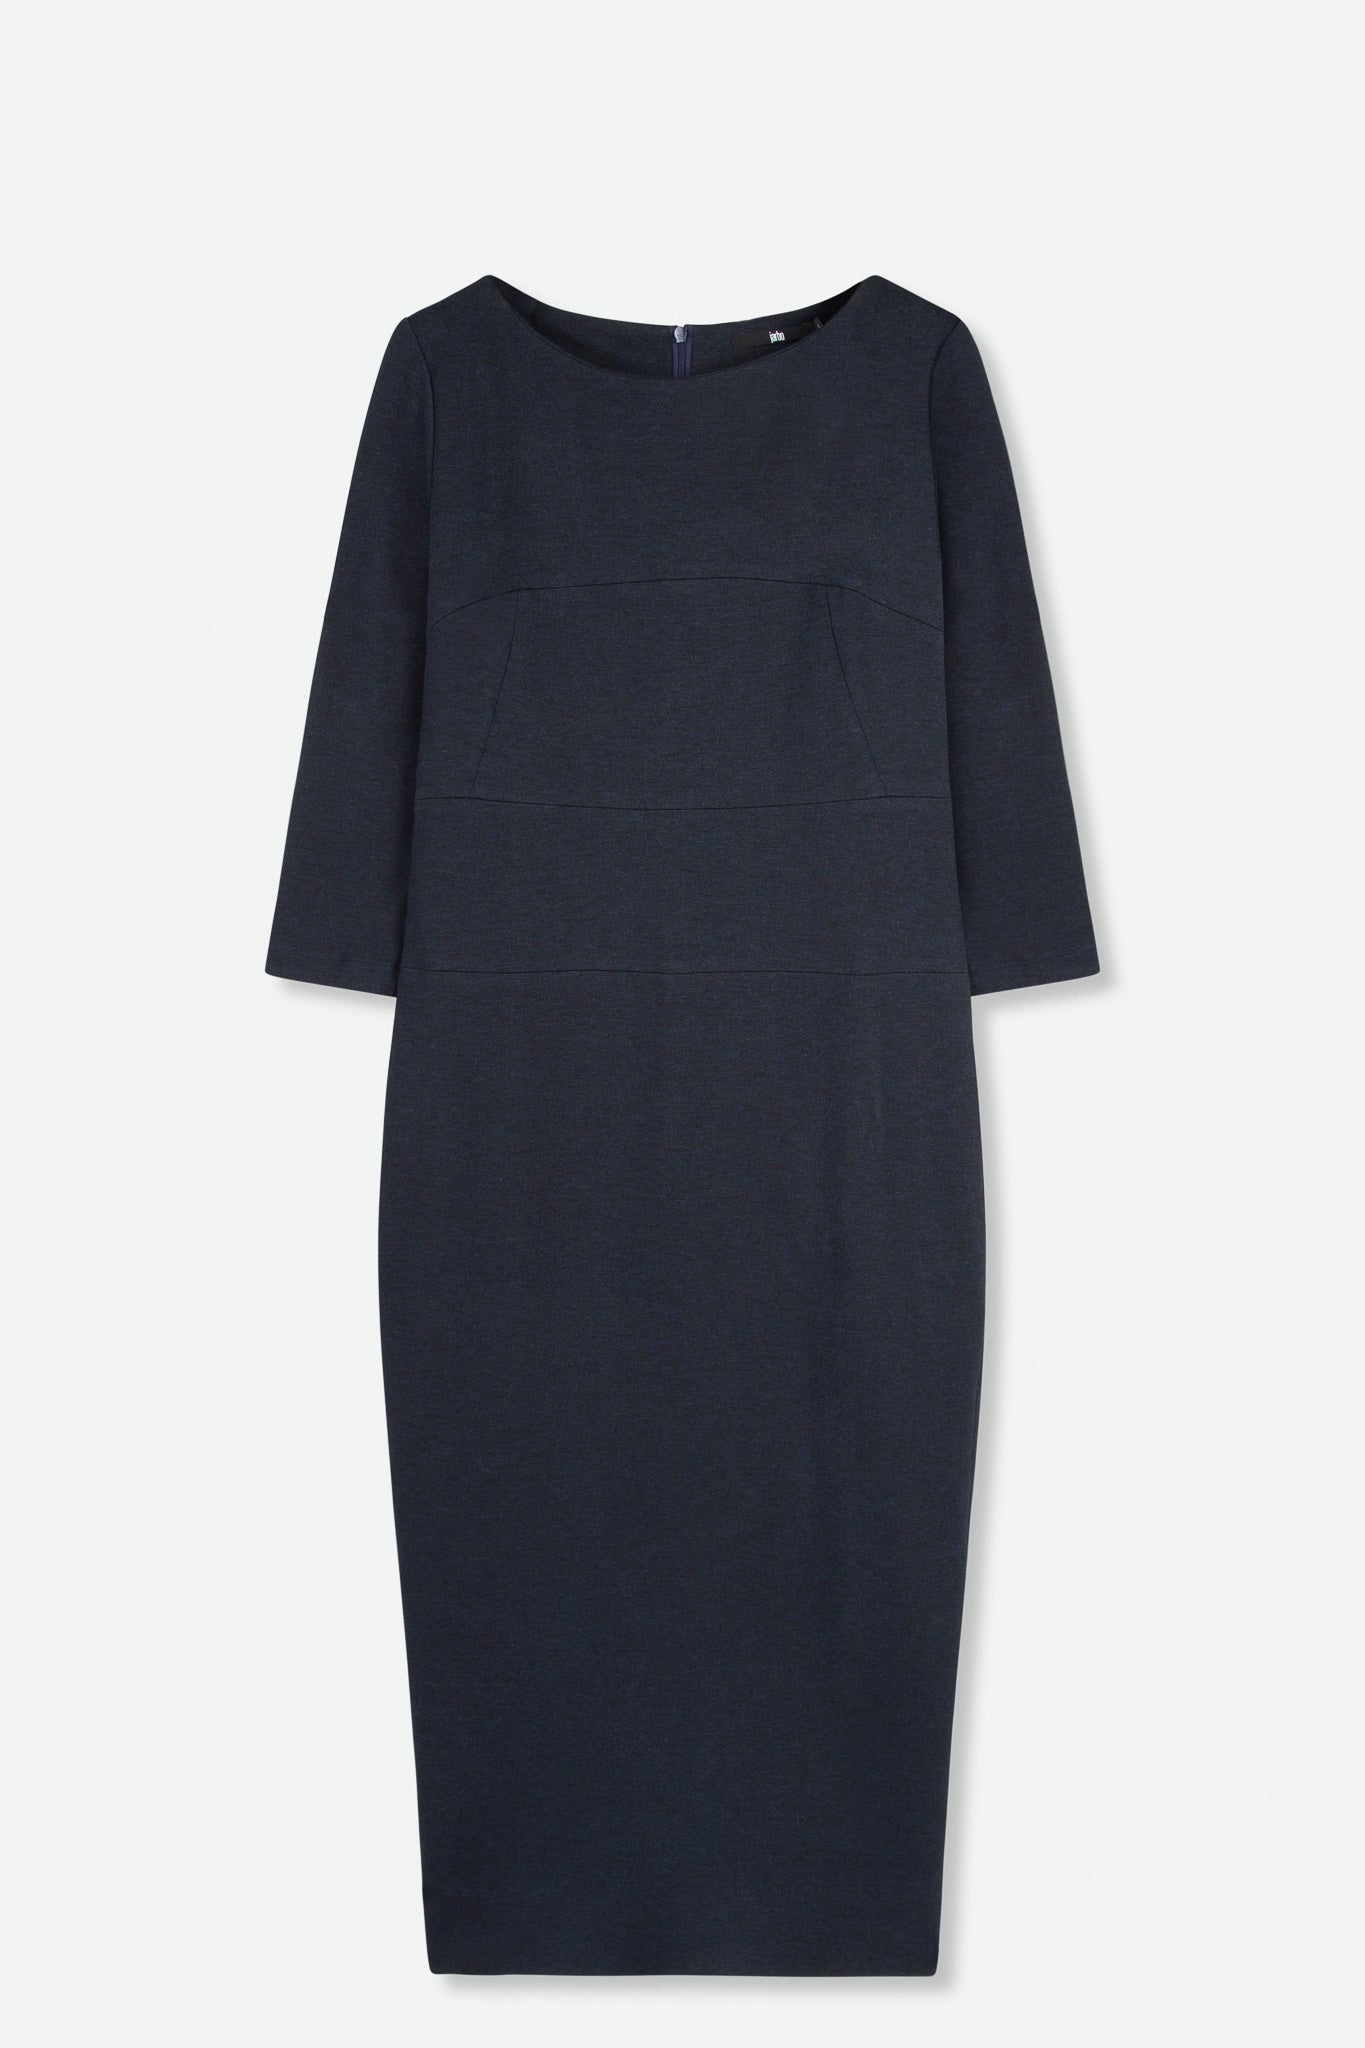 CLARE 3/4 SLEEVE WIDE NECK DRESS IN PONTE KNIT - Jarbo